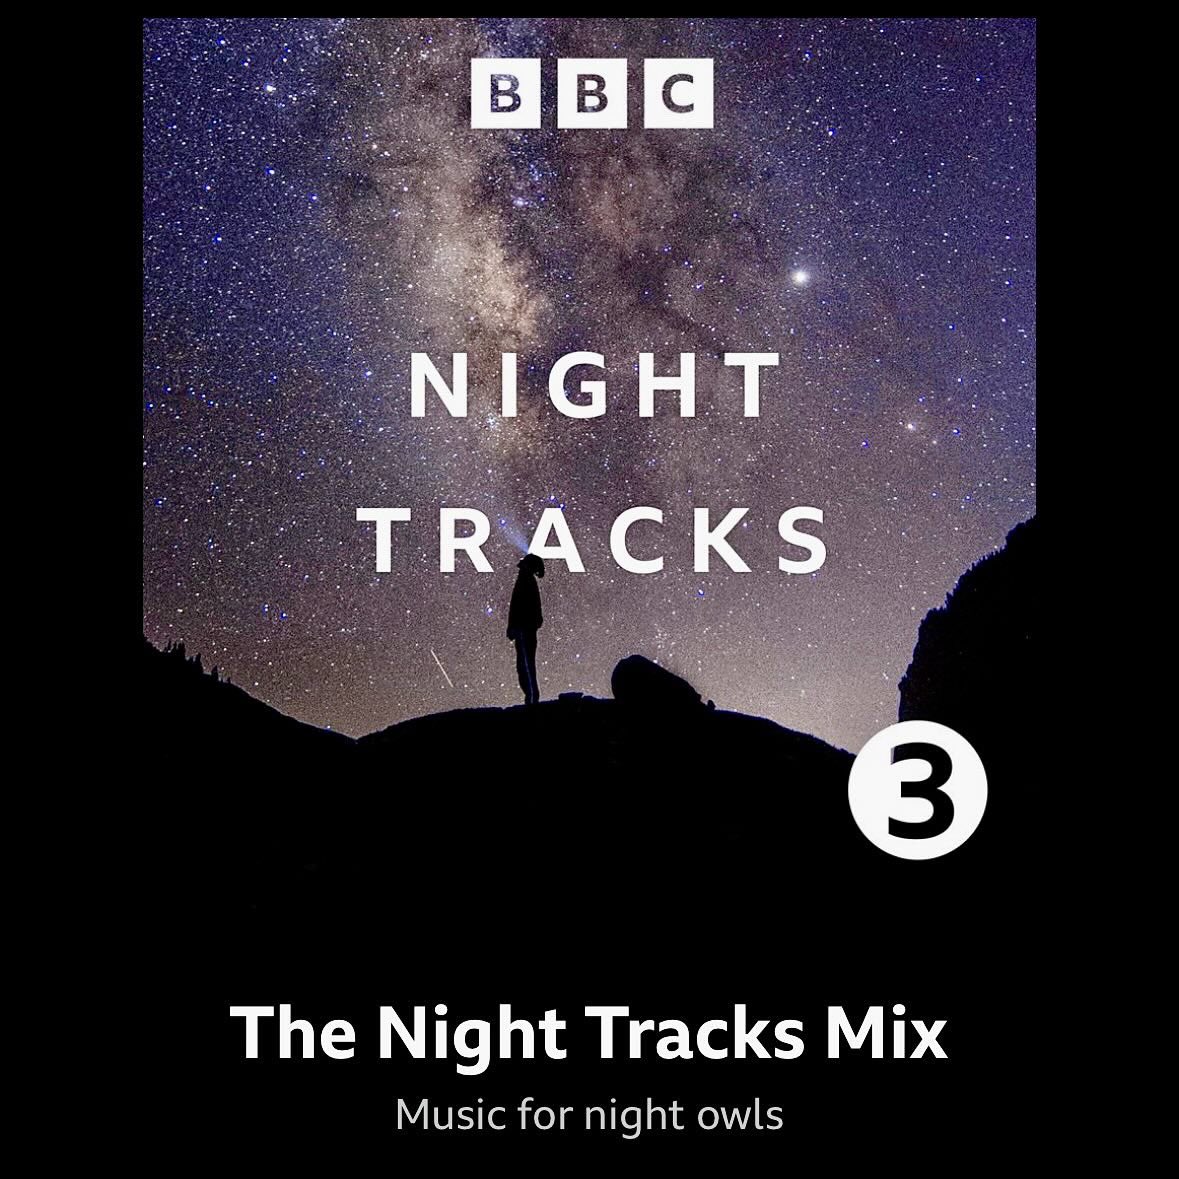 1/ Big thanks to @SaraMohrPietsch for playing my track “Lanty’s Tarn” on her Night Tracks Mix show on @BBCRadio3 last night. Nice to share the bill with the likes of Chopin, Chet Baker, Grieg and a recent favourite artist of mine, @guitar_yaz Show link: bbc.co.uk/programmes/m00…